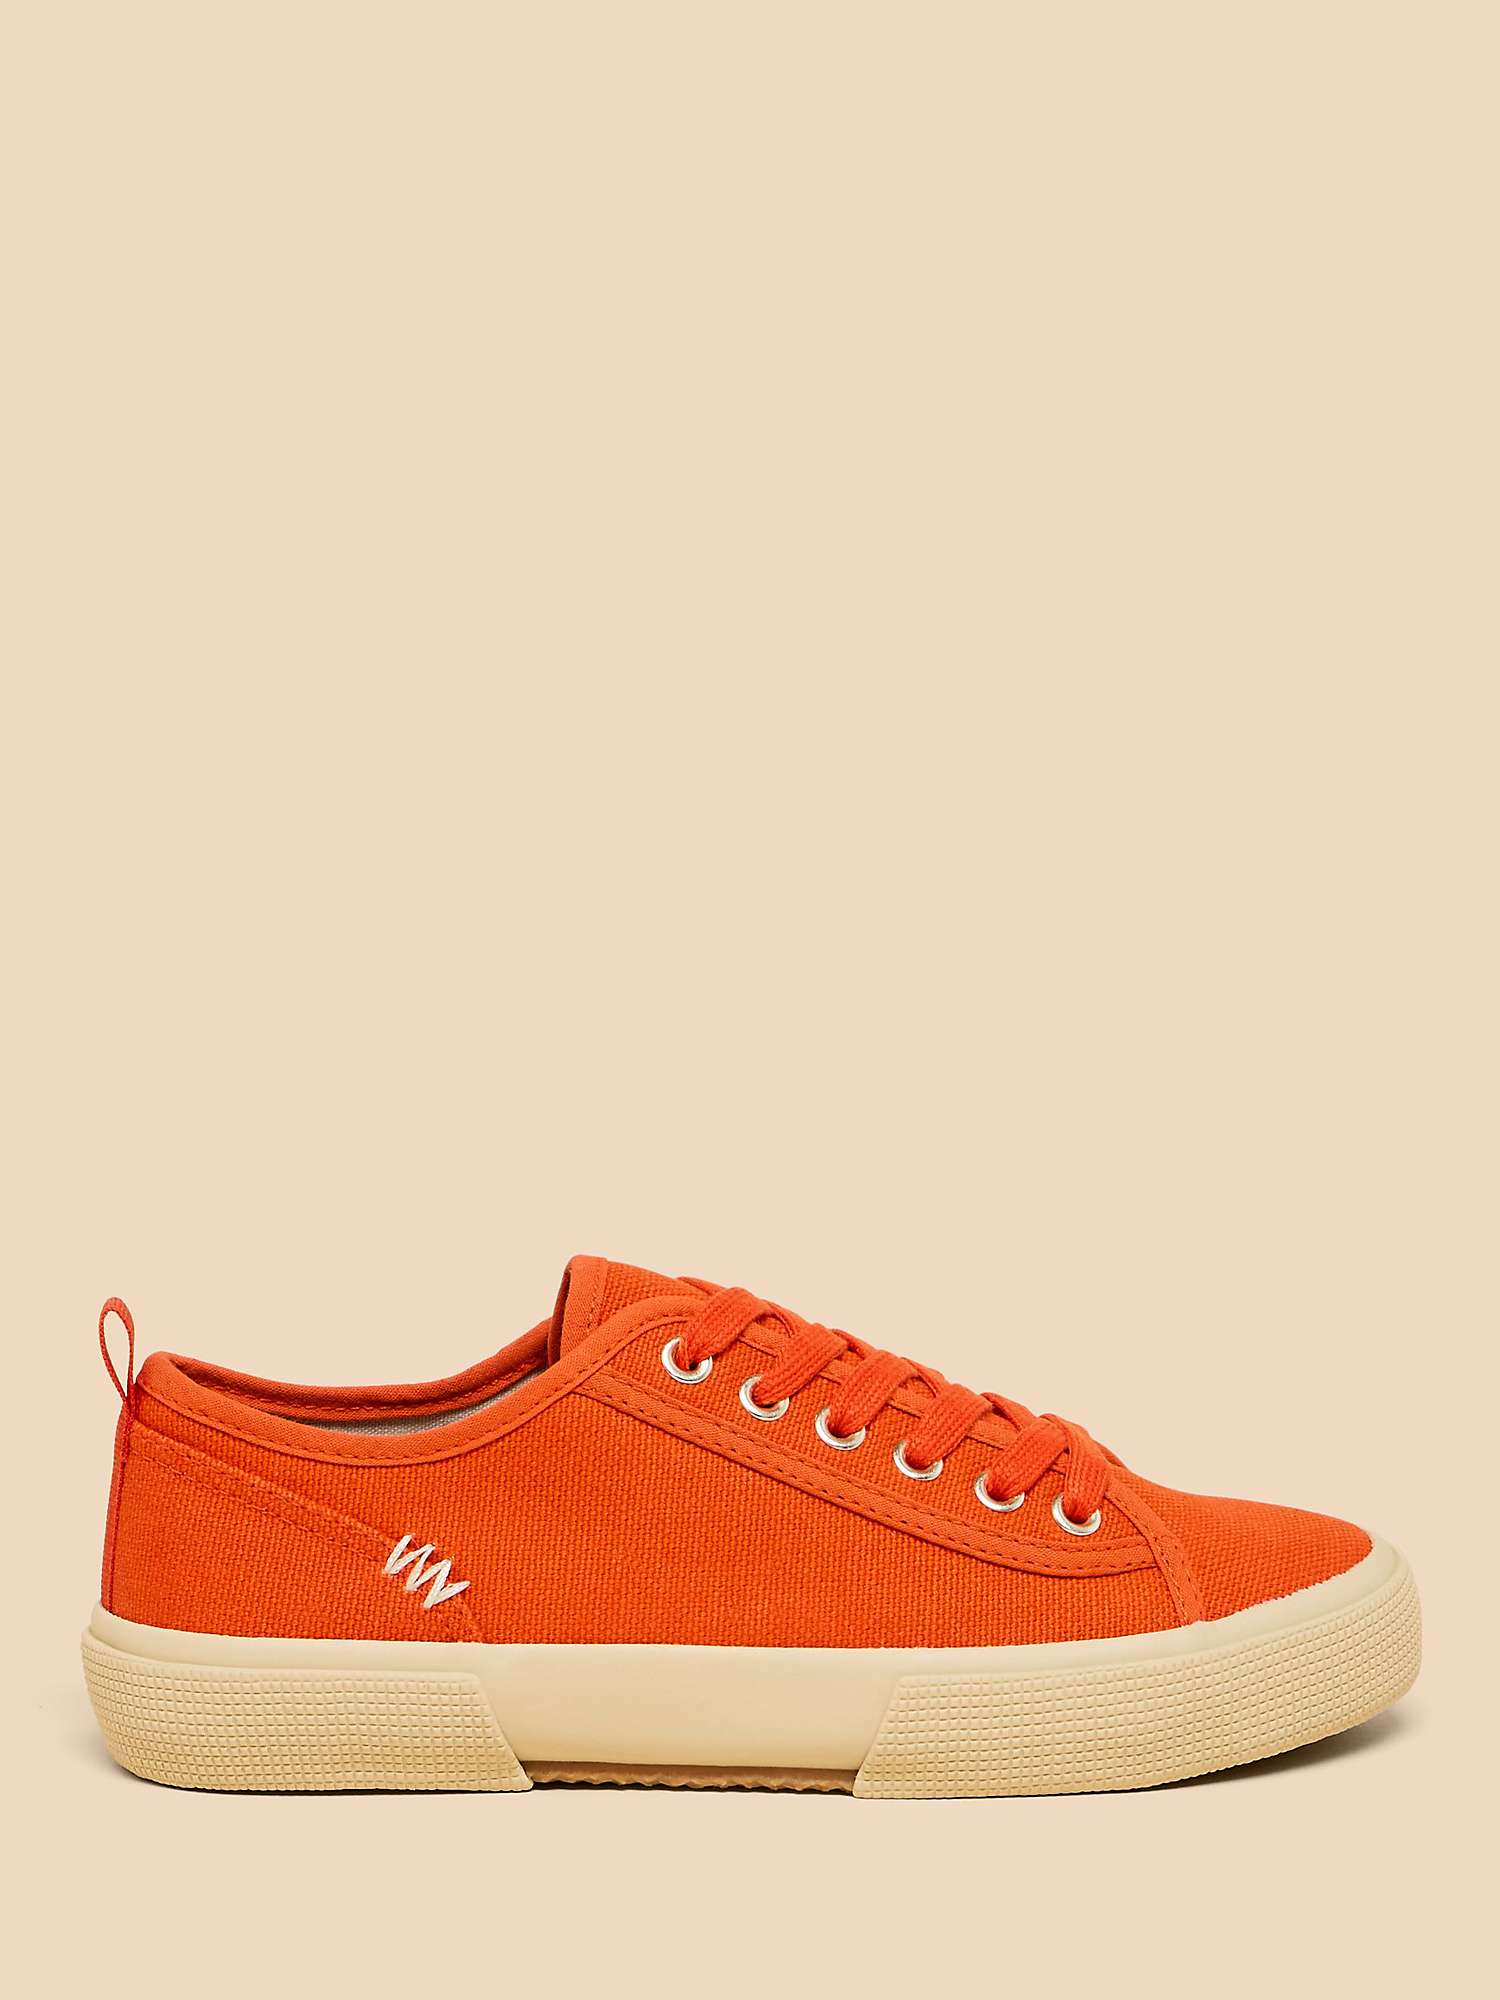 Buy White Stuff Pippa Canvas Lace Up Trainers Online at johnlewis.com